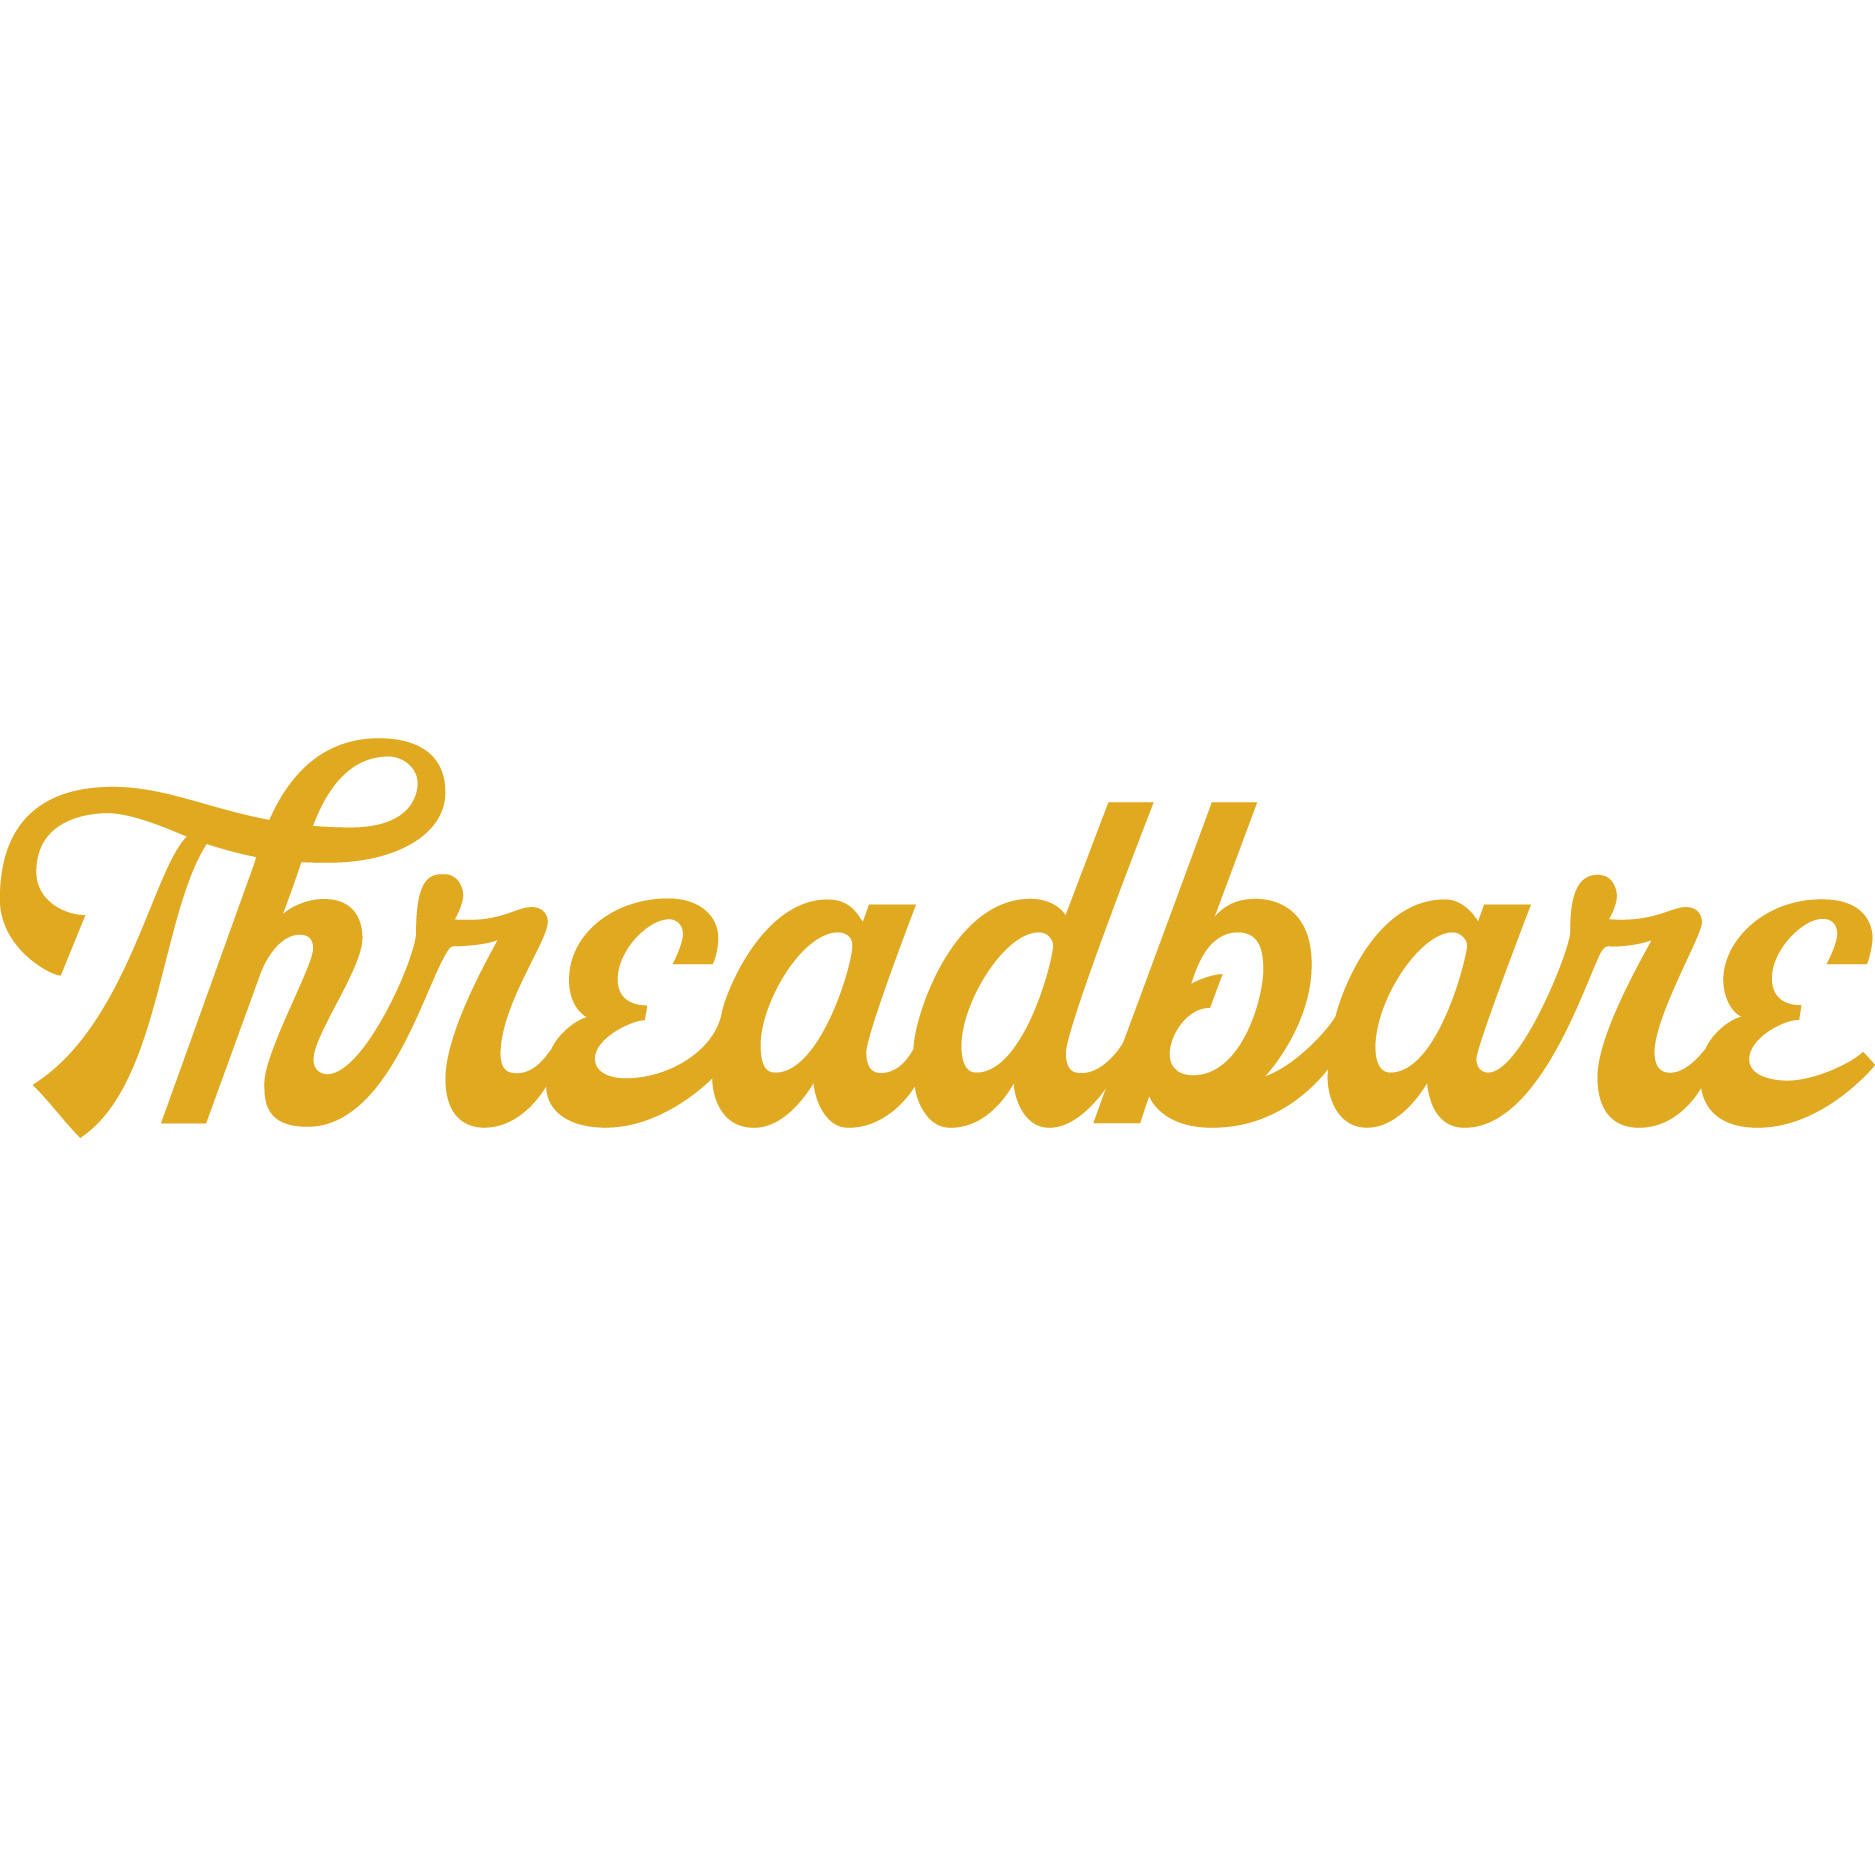 Threadbare logo design by logo designer Joe Hansen for your inspiration and for the worlds largest logo competition